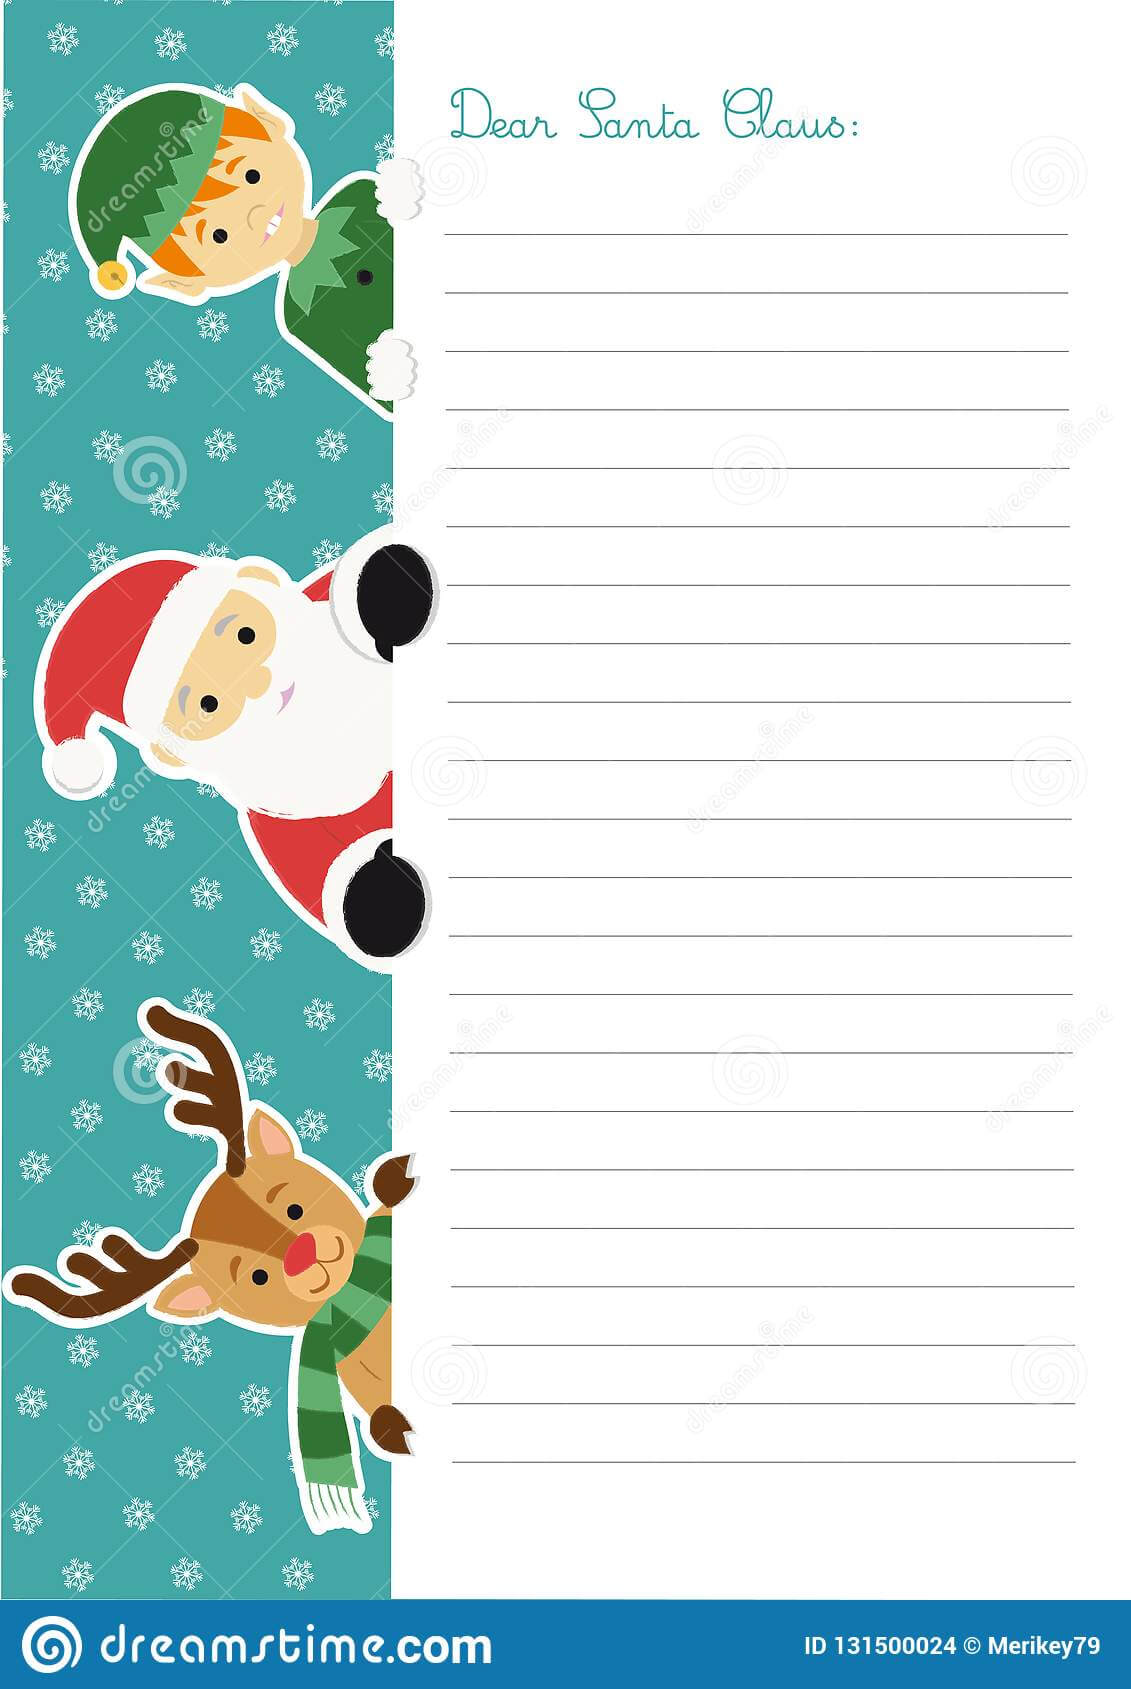 Letter Template To Santa Claus With An Elf And A Reindeer With Blank Letter From Santa Template